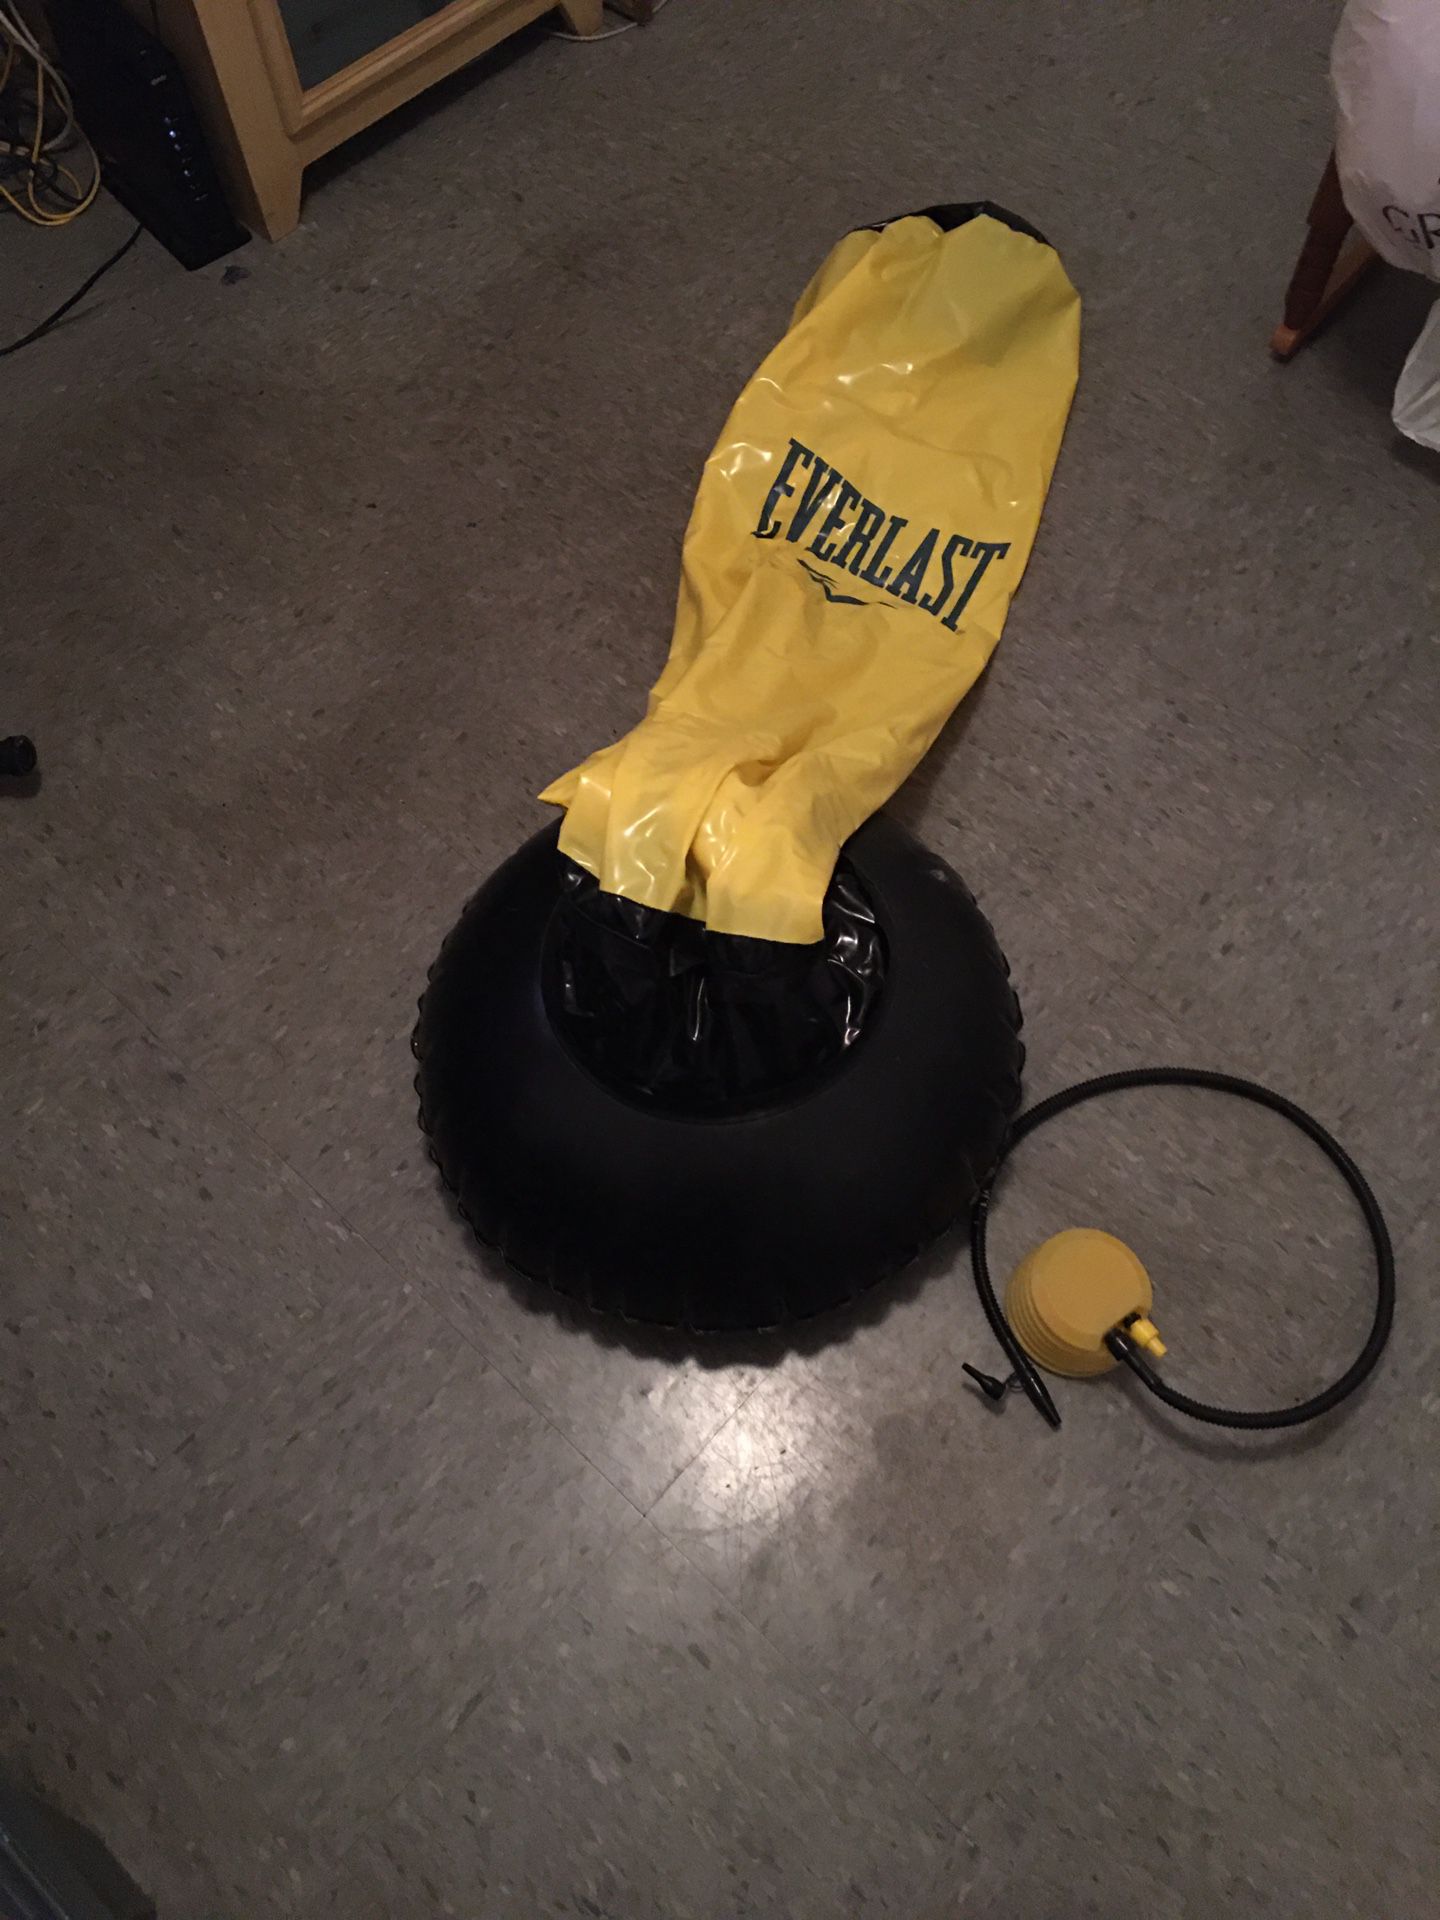 Everlast Inflatable Punching bag w/pump